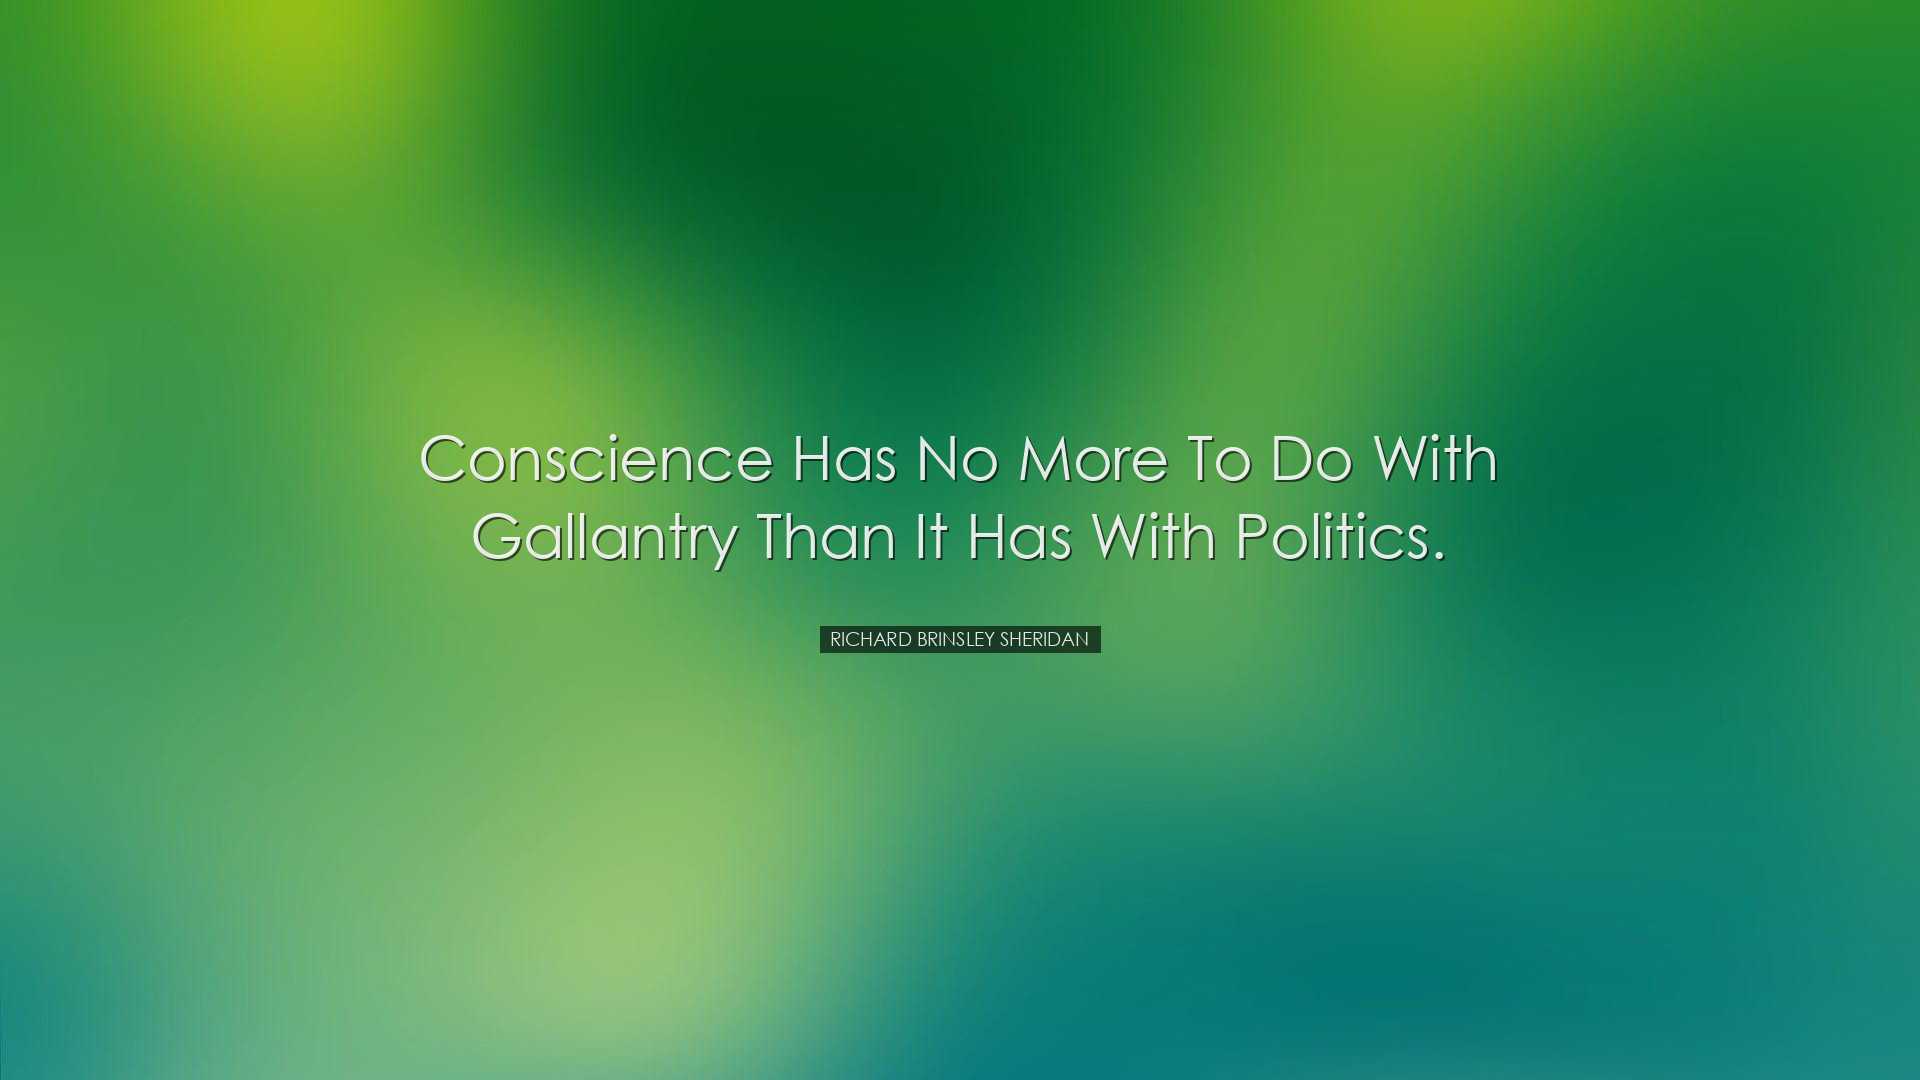 Conscience has no more to do with gallantry than it has with polit